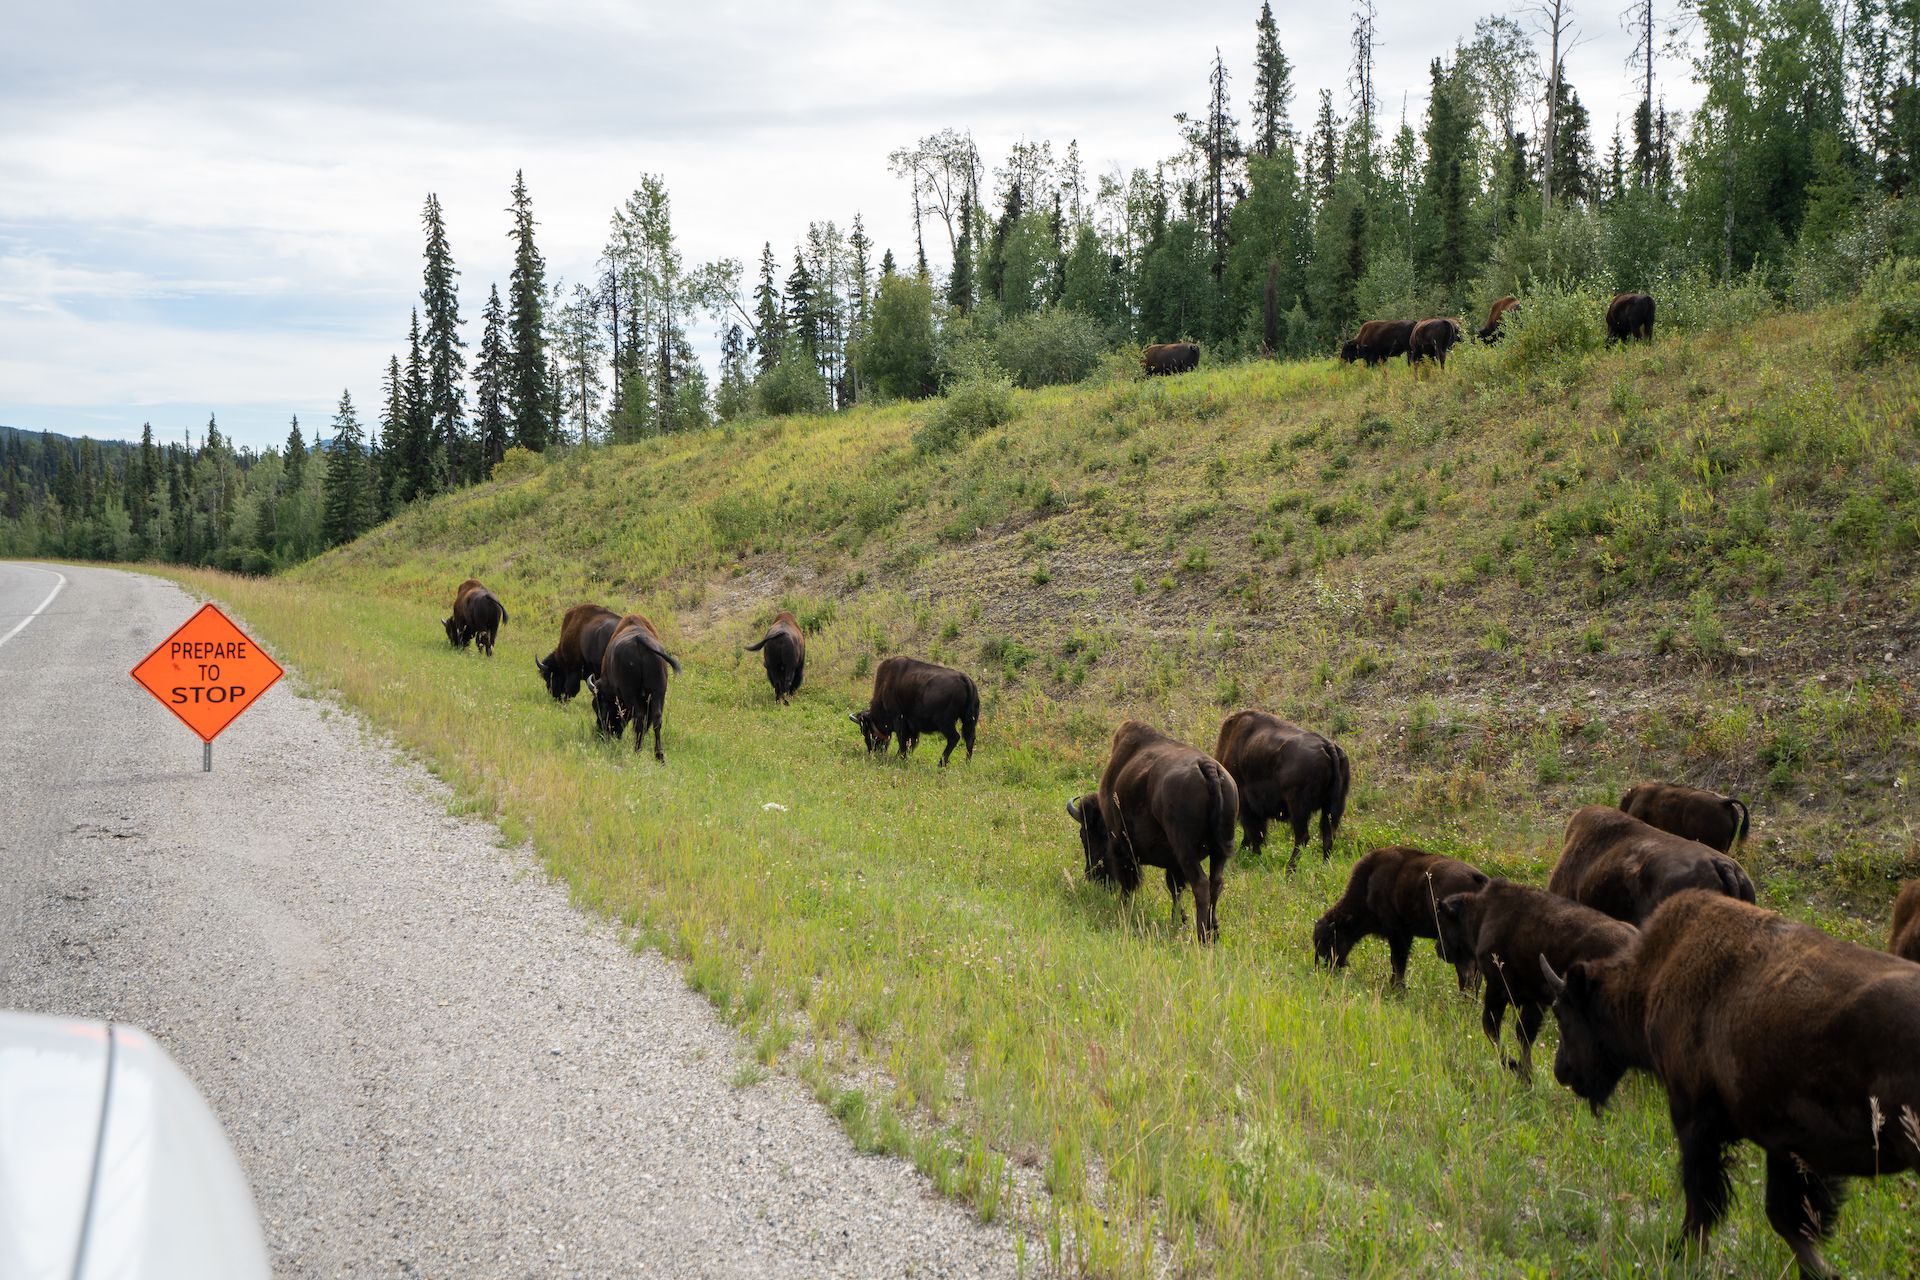 Along the way, we ran into a herd of bisons.